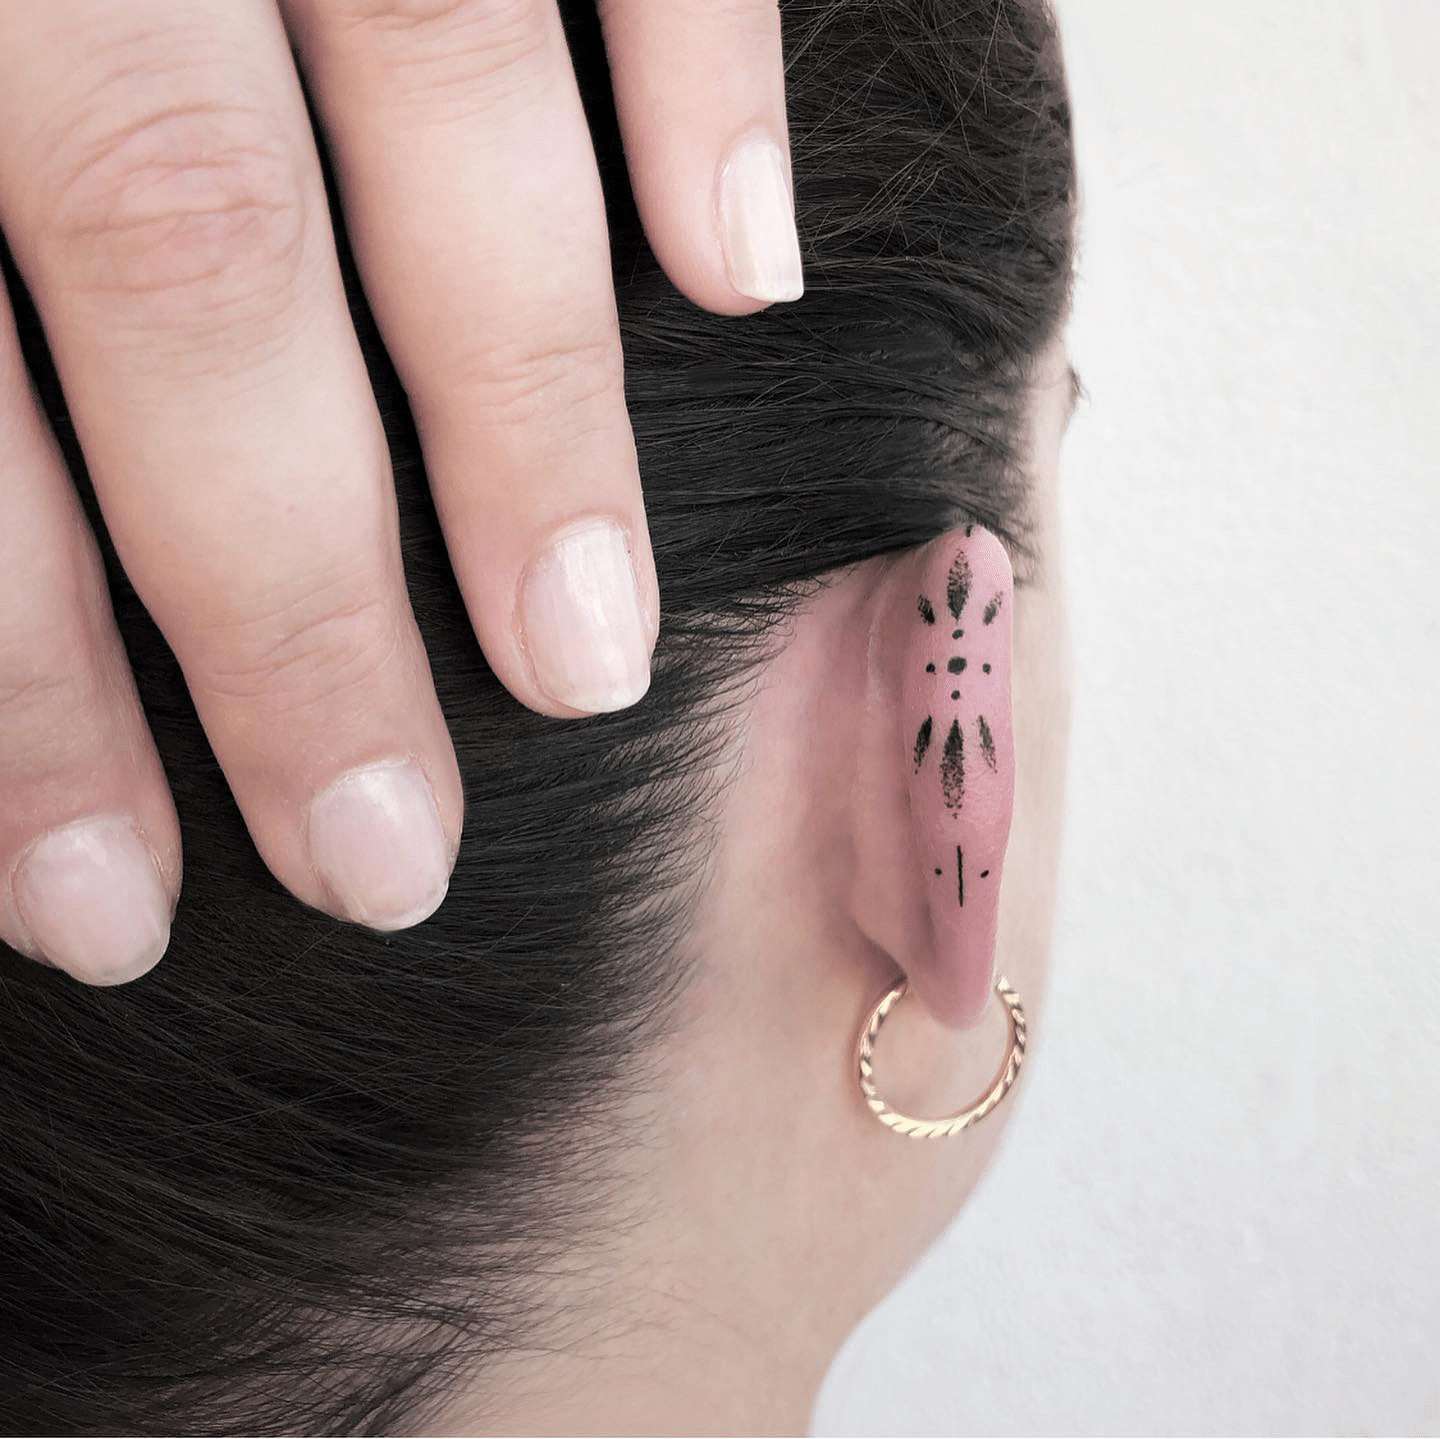 Outer Curve of the Ear tattoo